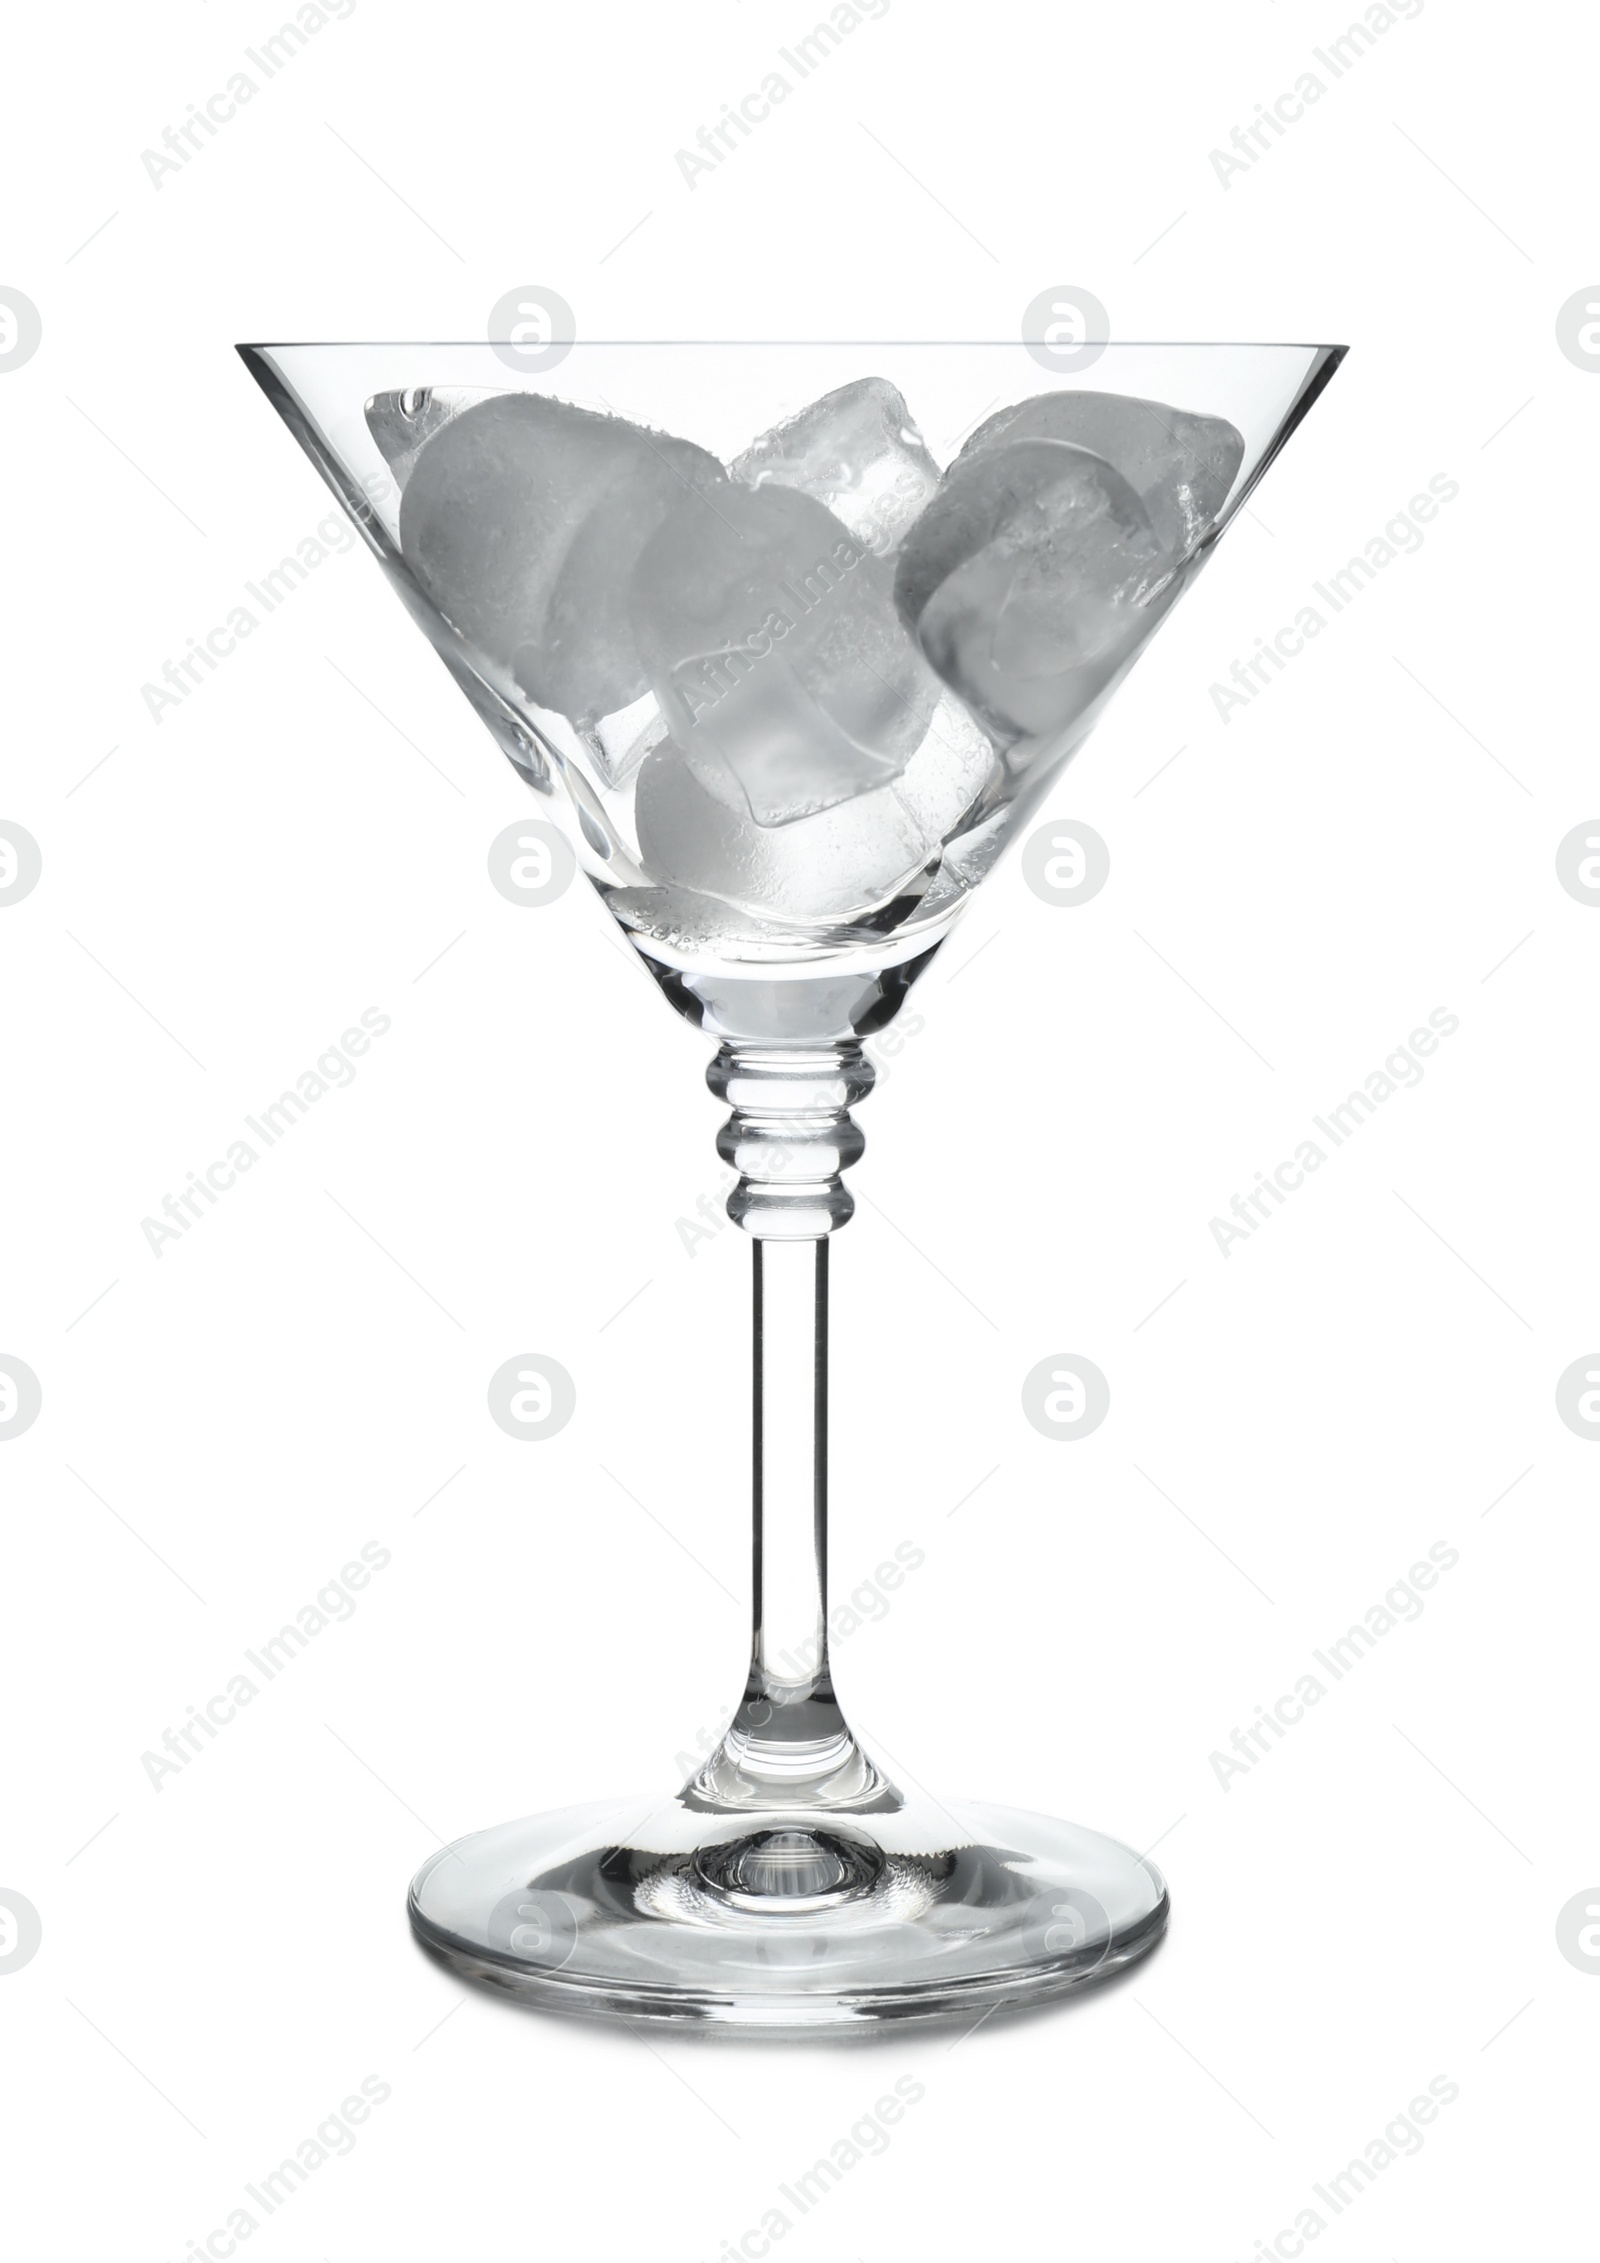 Photo of Martini glass with ice cubes on white background